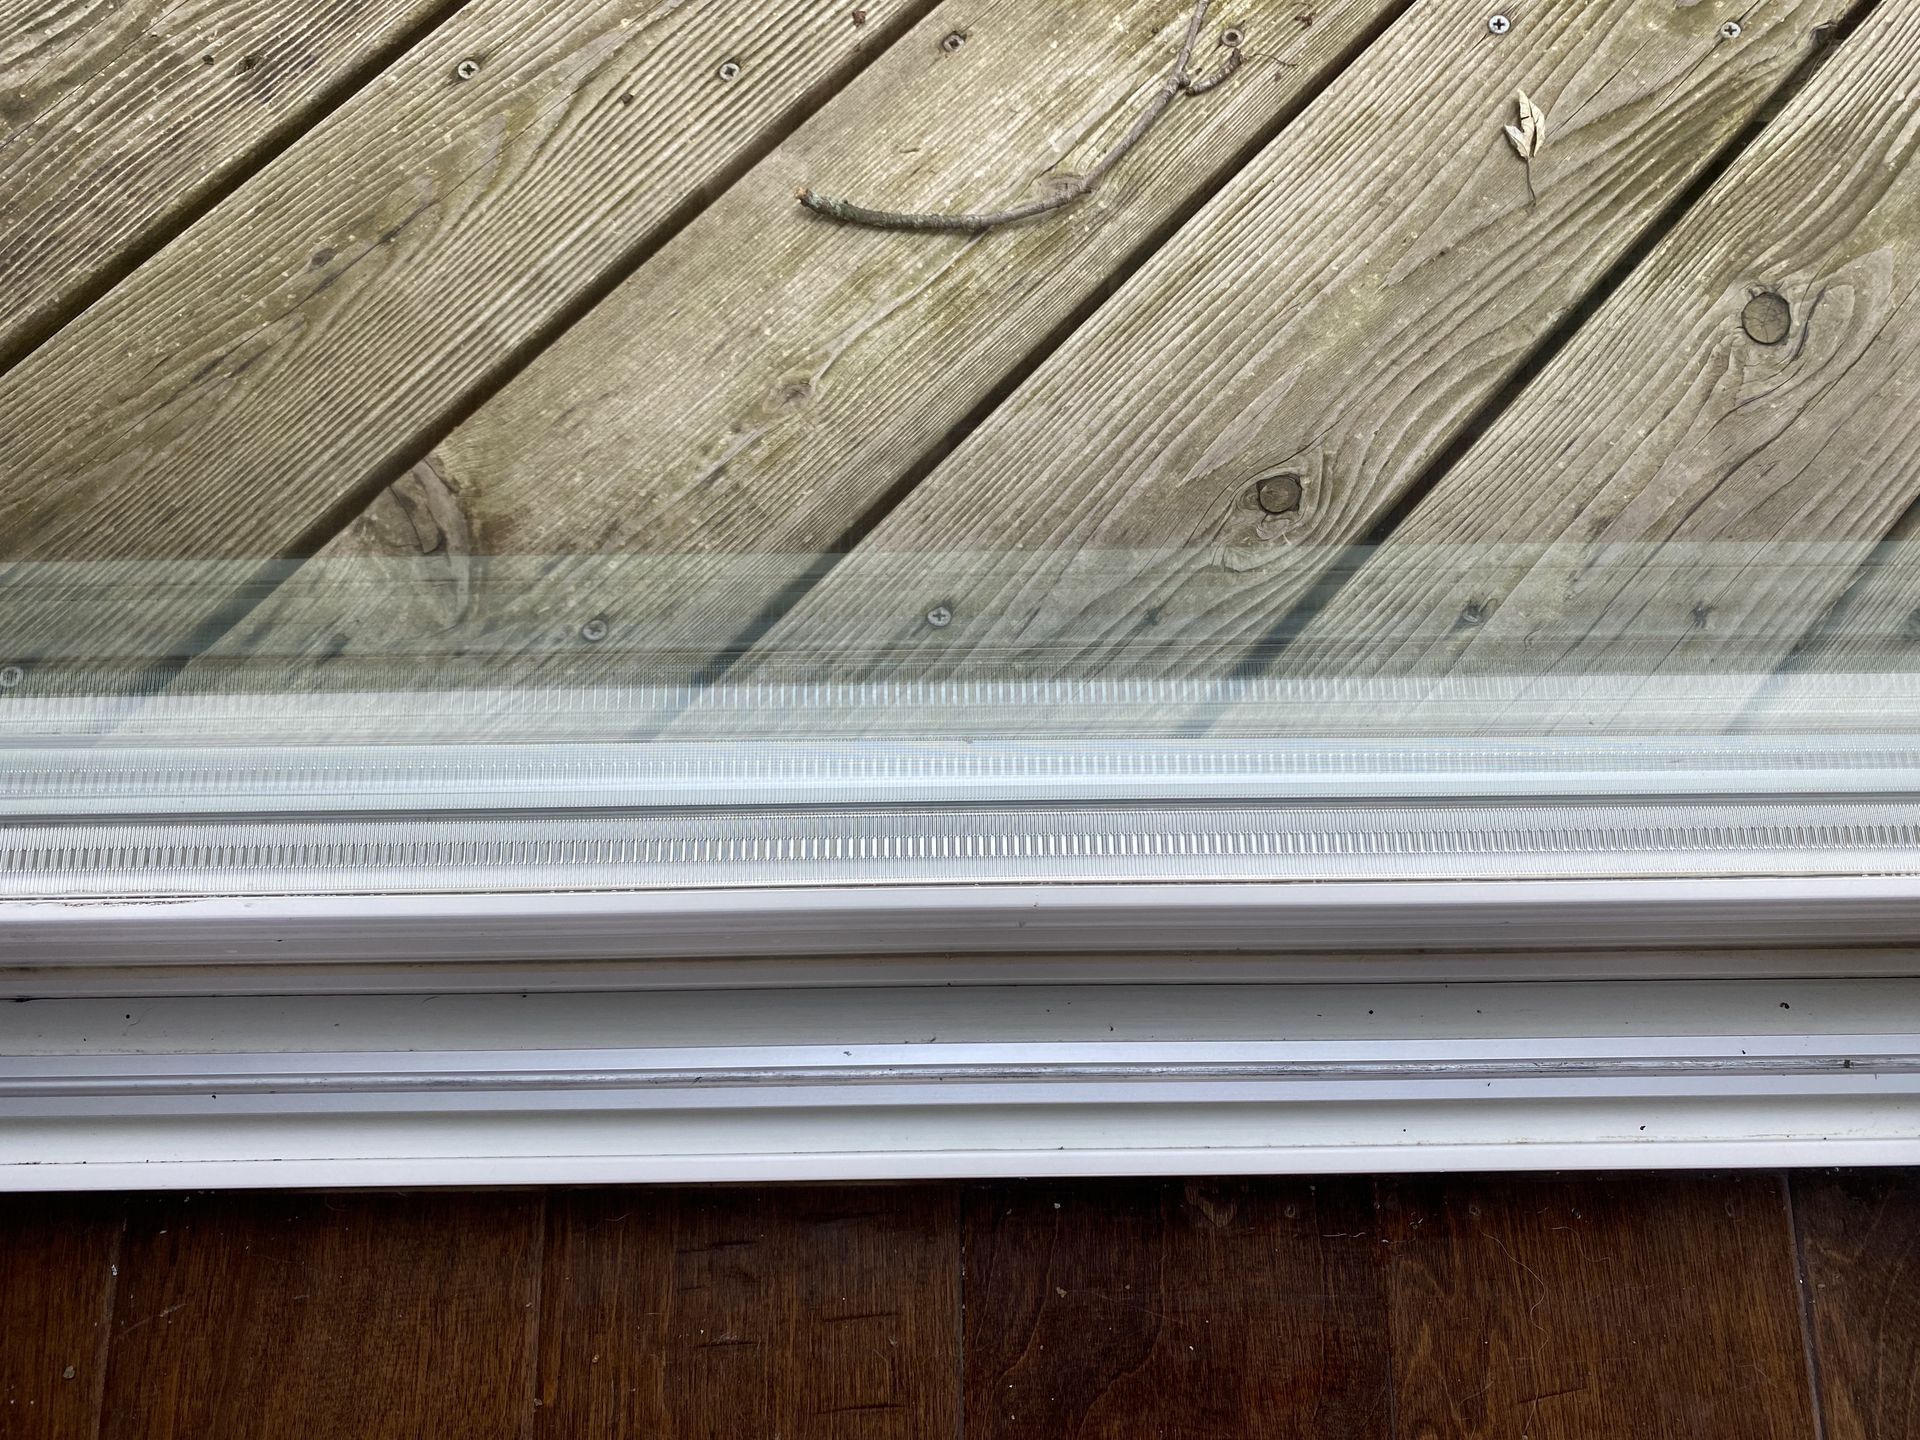 a close up of a window sill on a wooden deck .